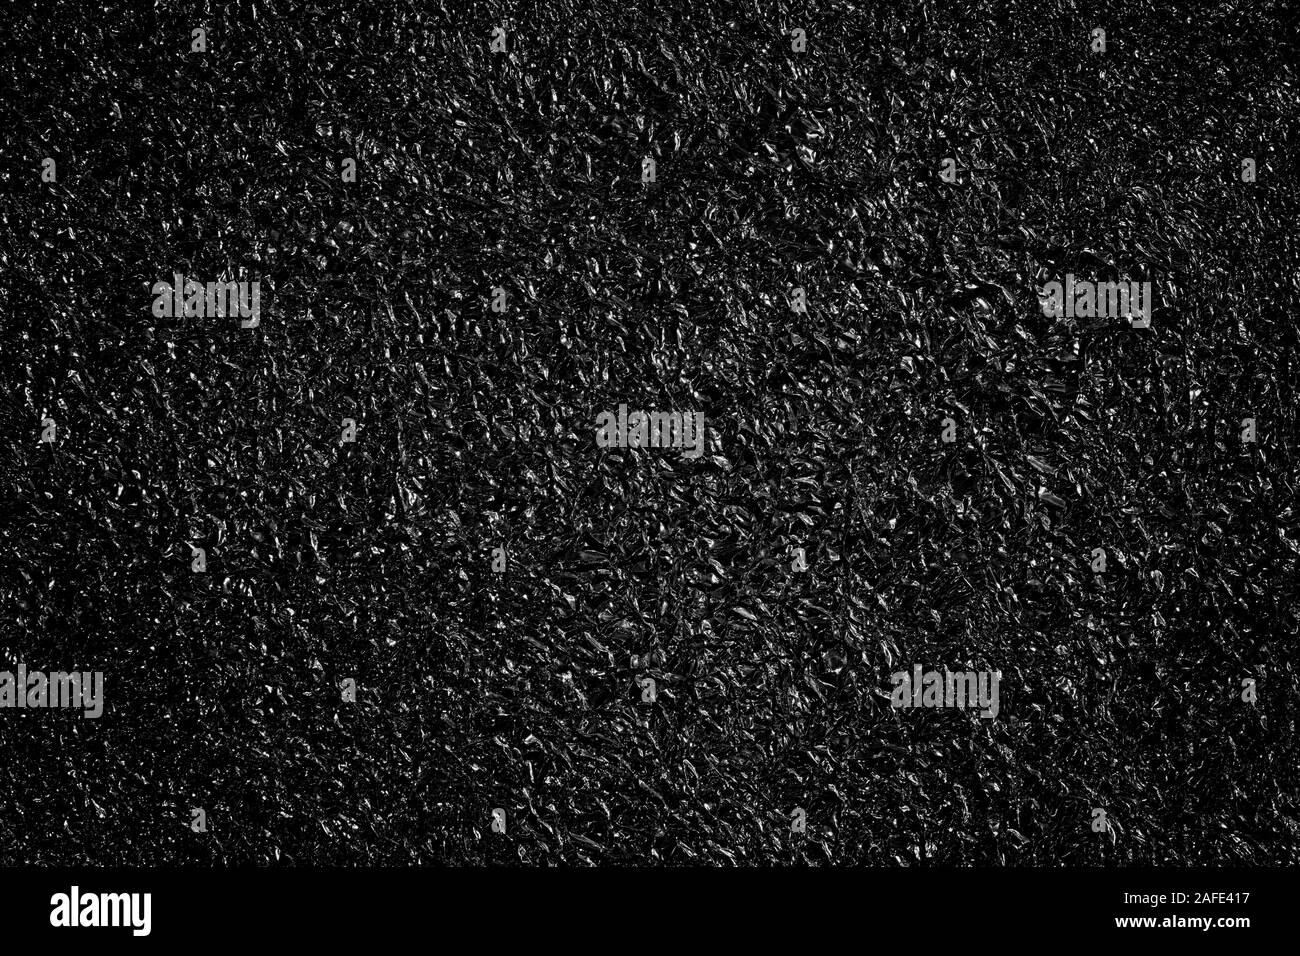 Black and white foil texture background for web banner design Stock Photo